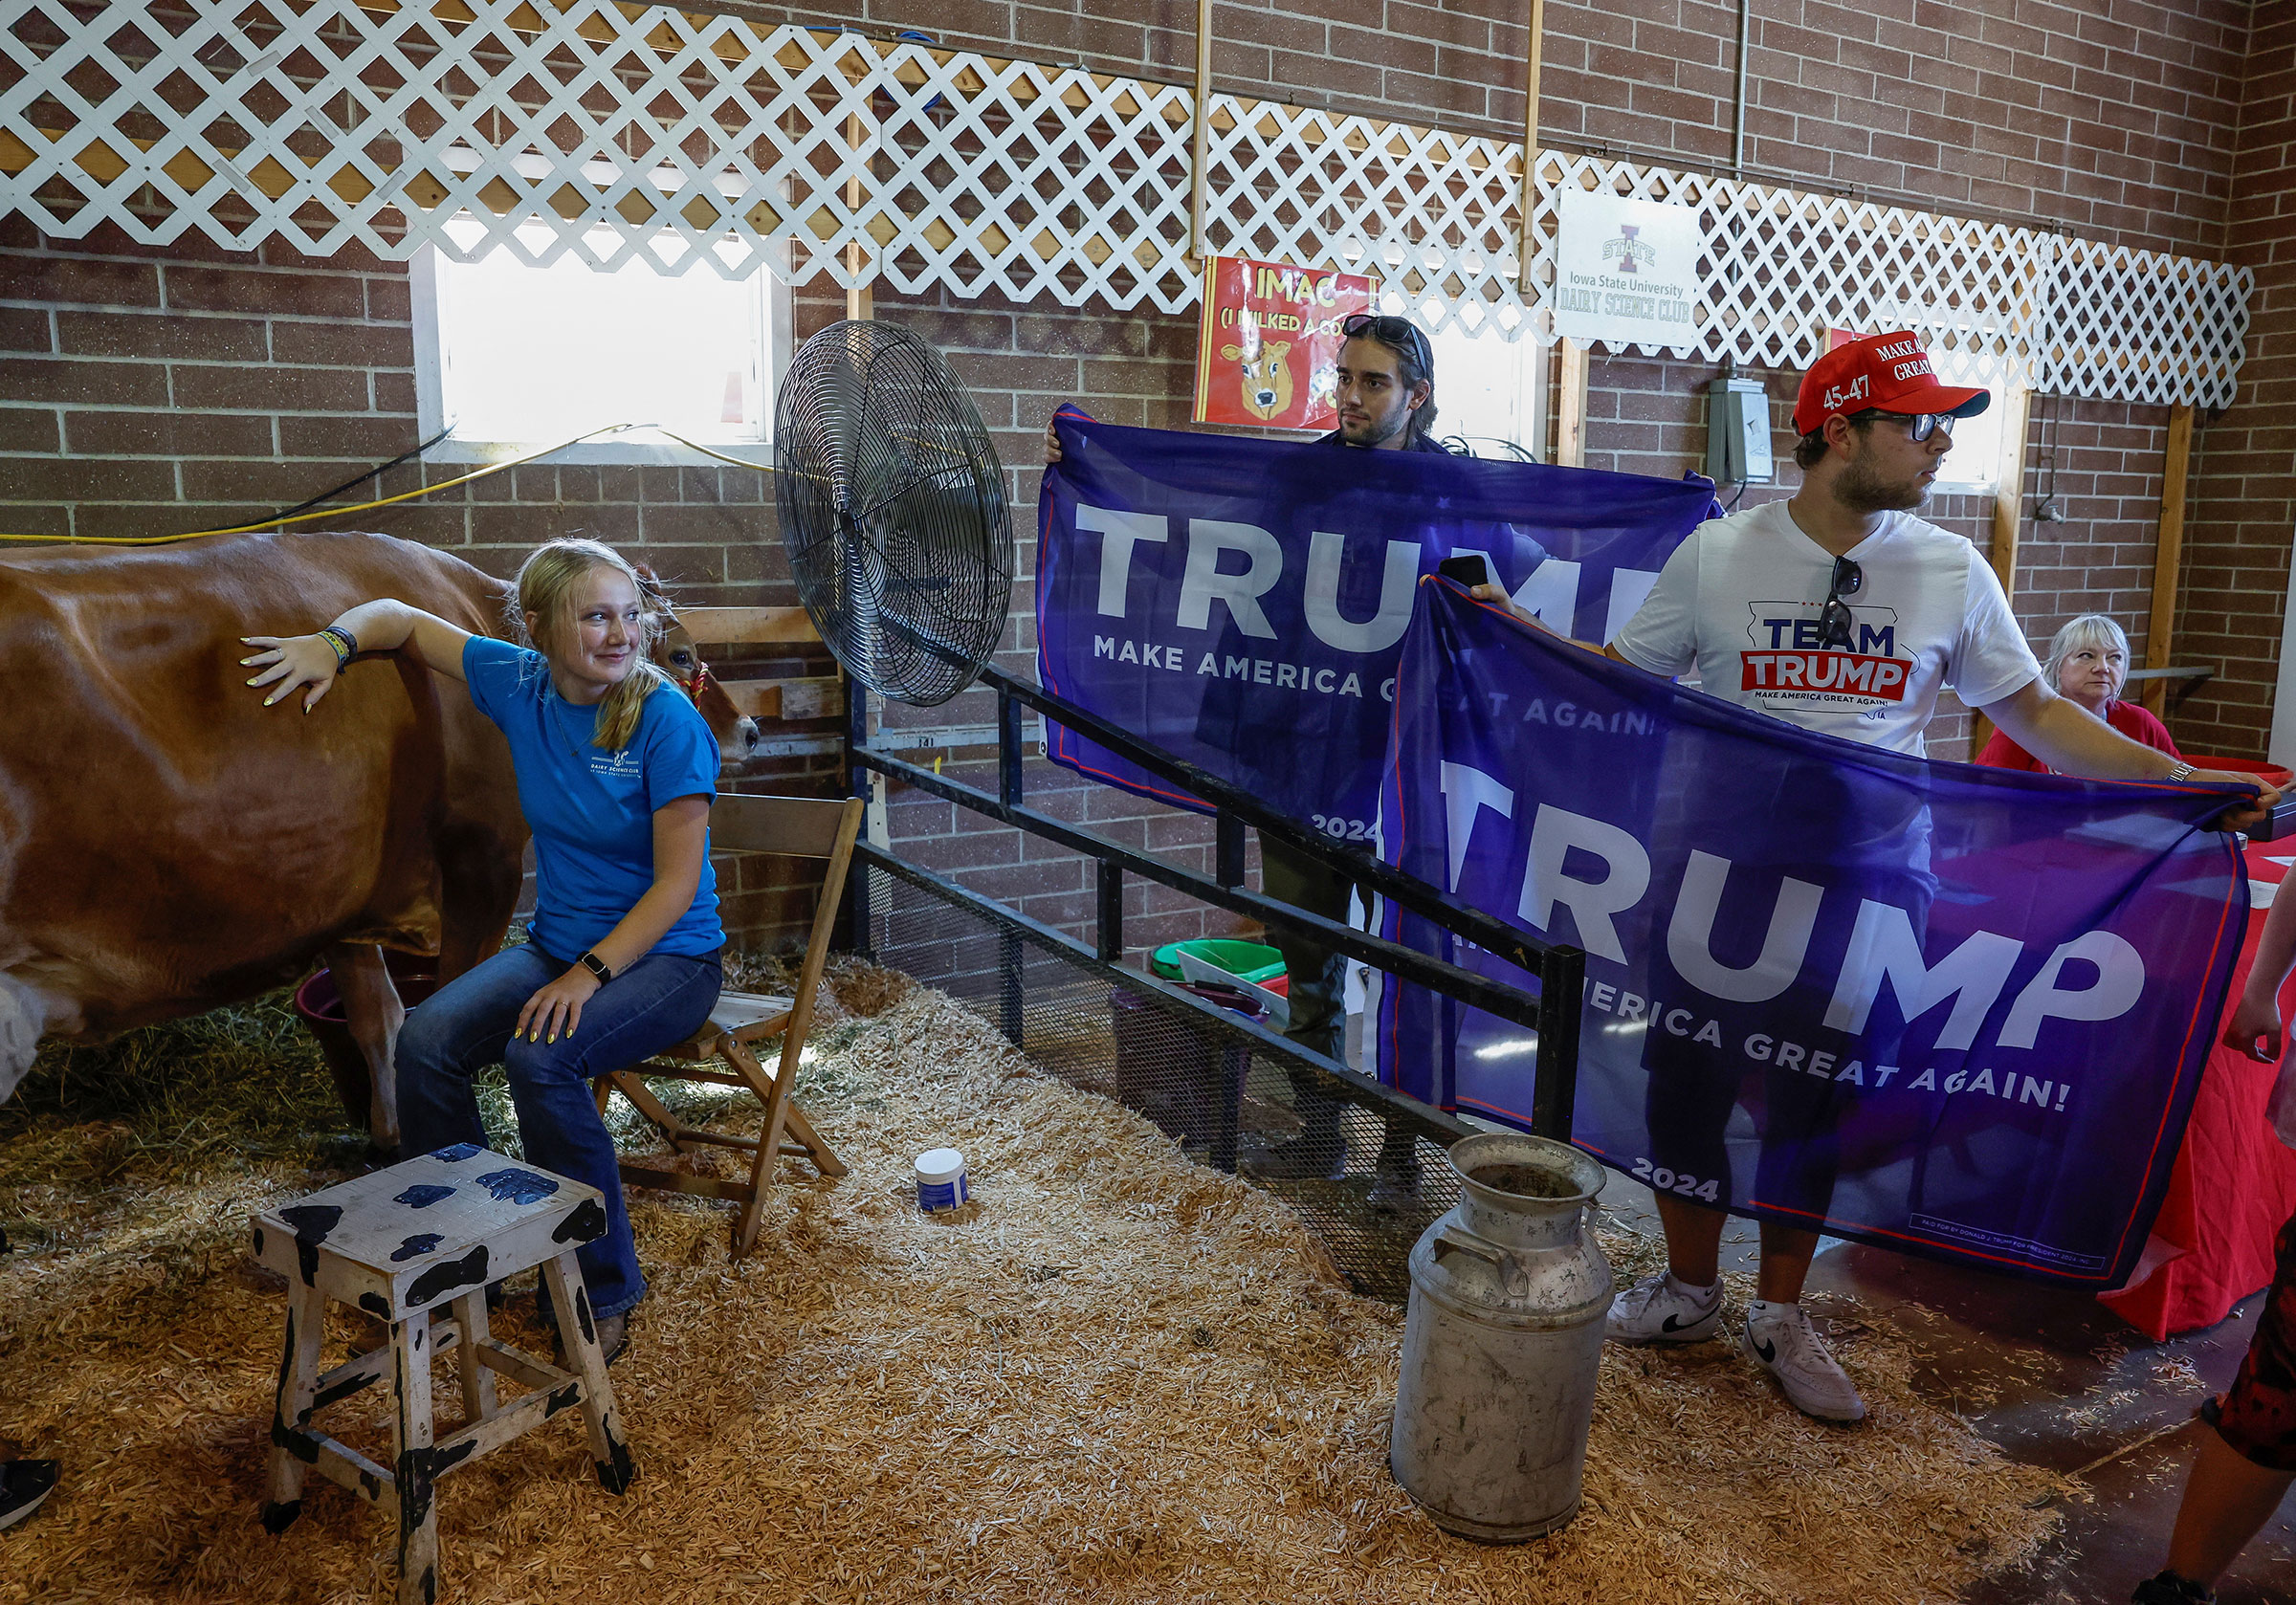 Trump campaign workers hold Trump flags for a photo opportunity with Kari Lake, at the Iowa State Fair